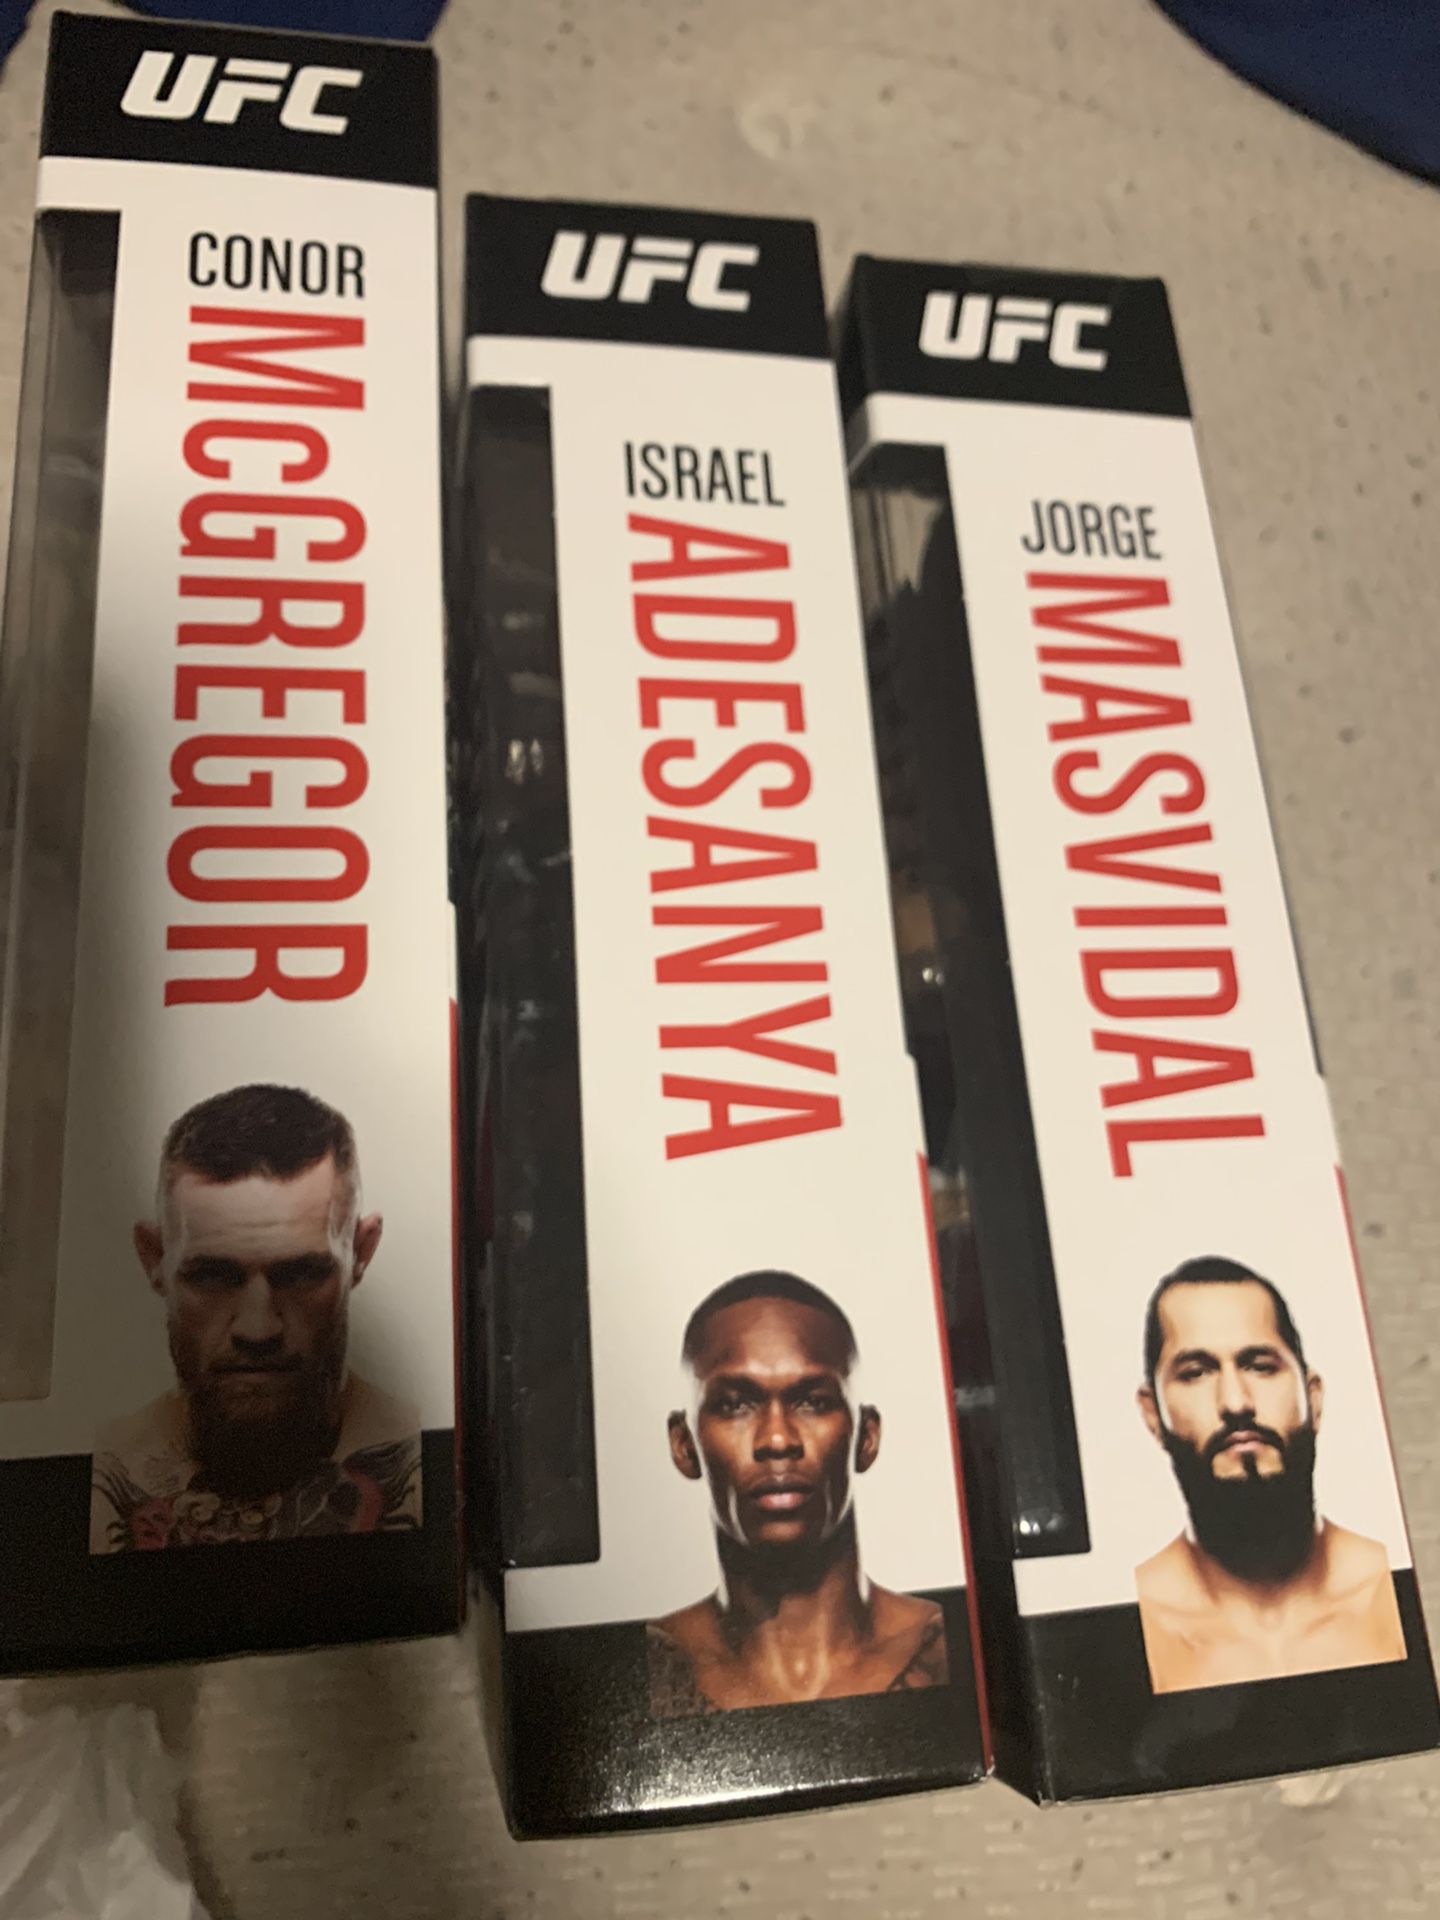 UFC Collector Action Figures With UFC Championship  Belts And Attachments  Brand New Series 1